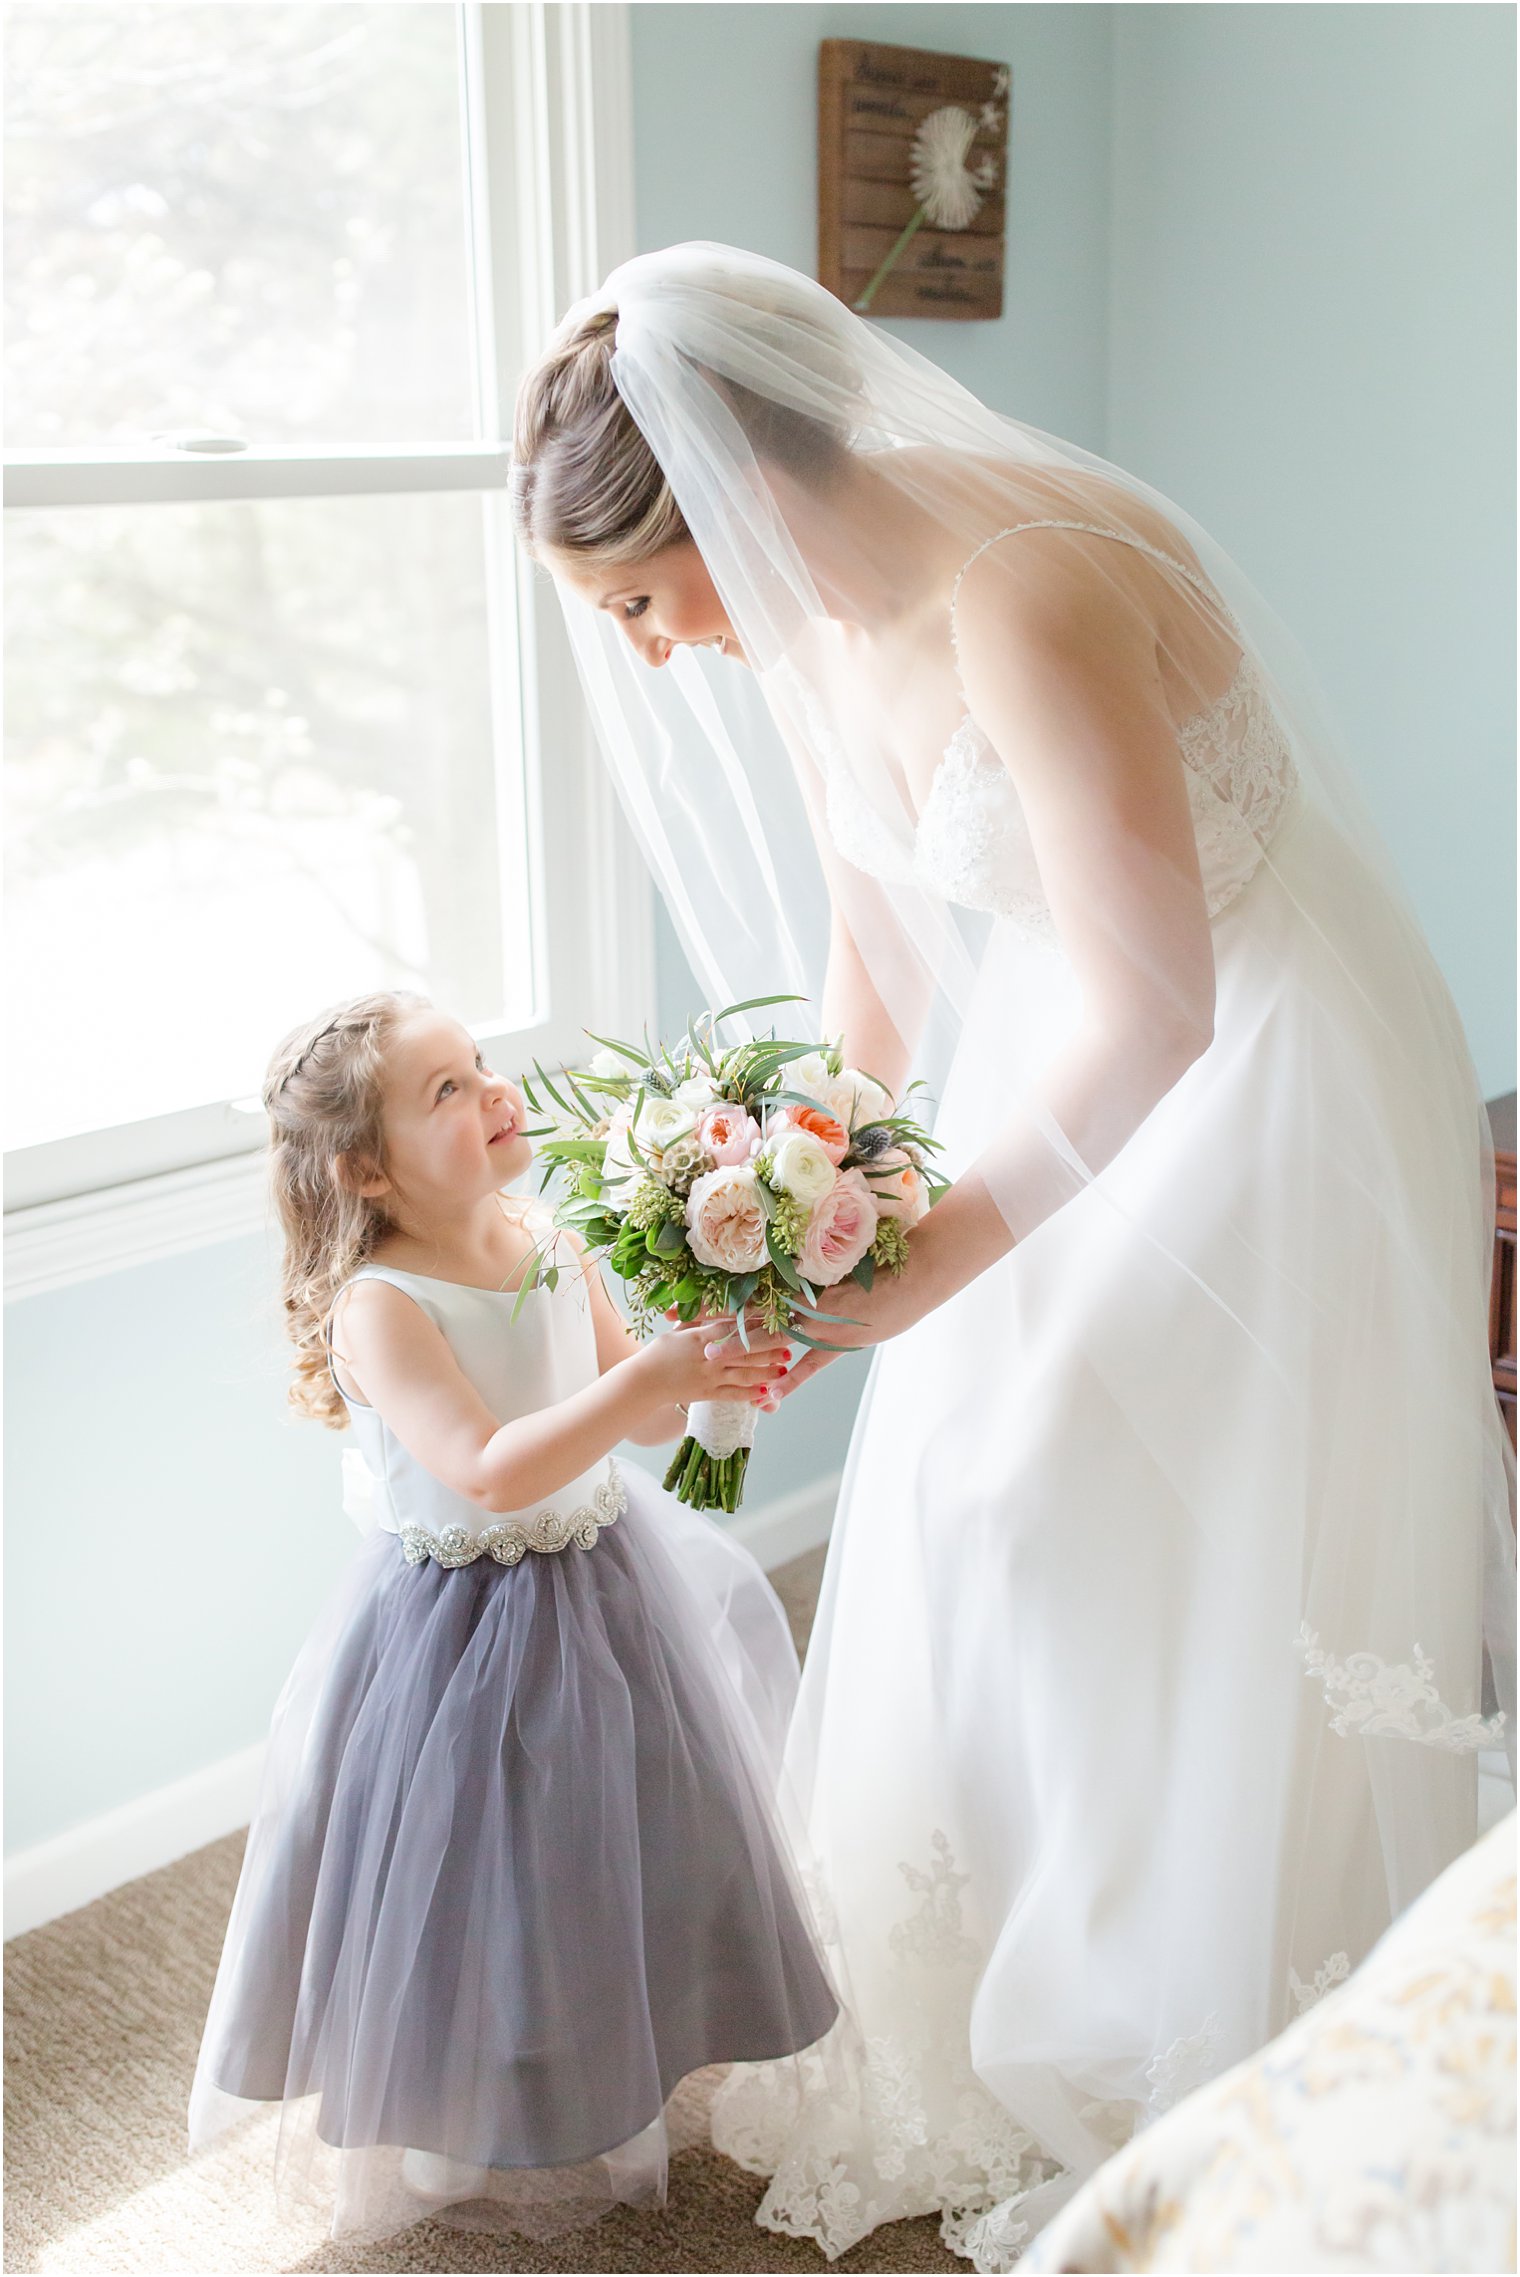 Flower girl giving bouquet to bride